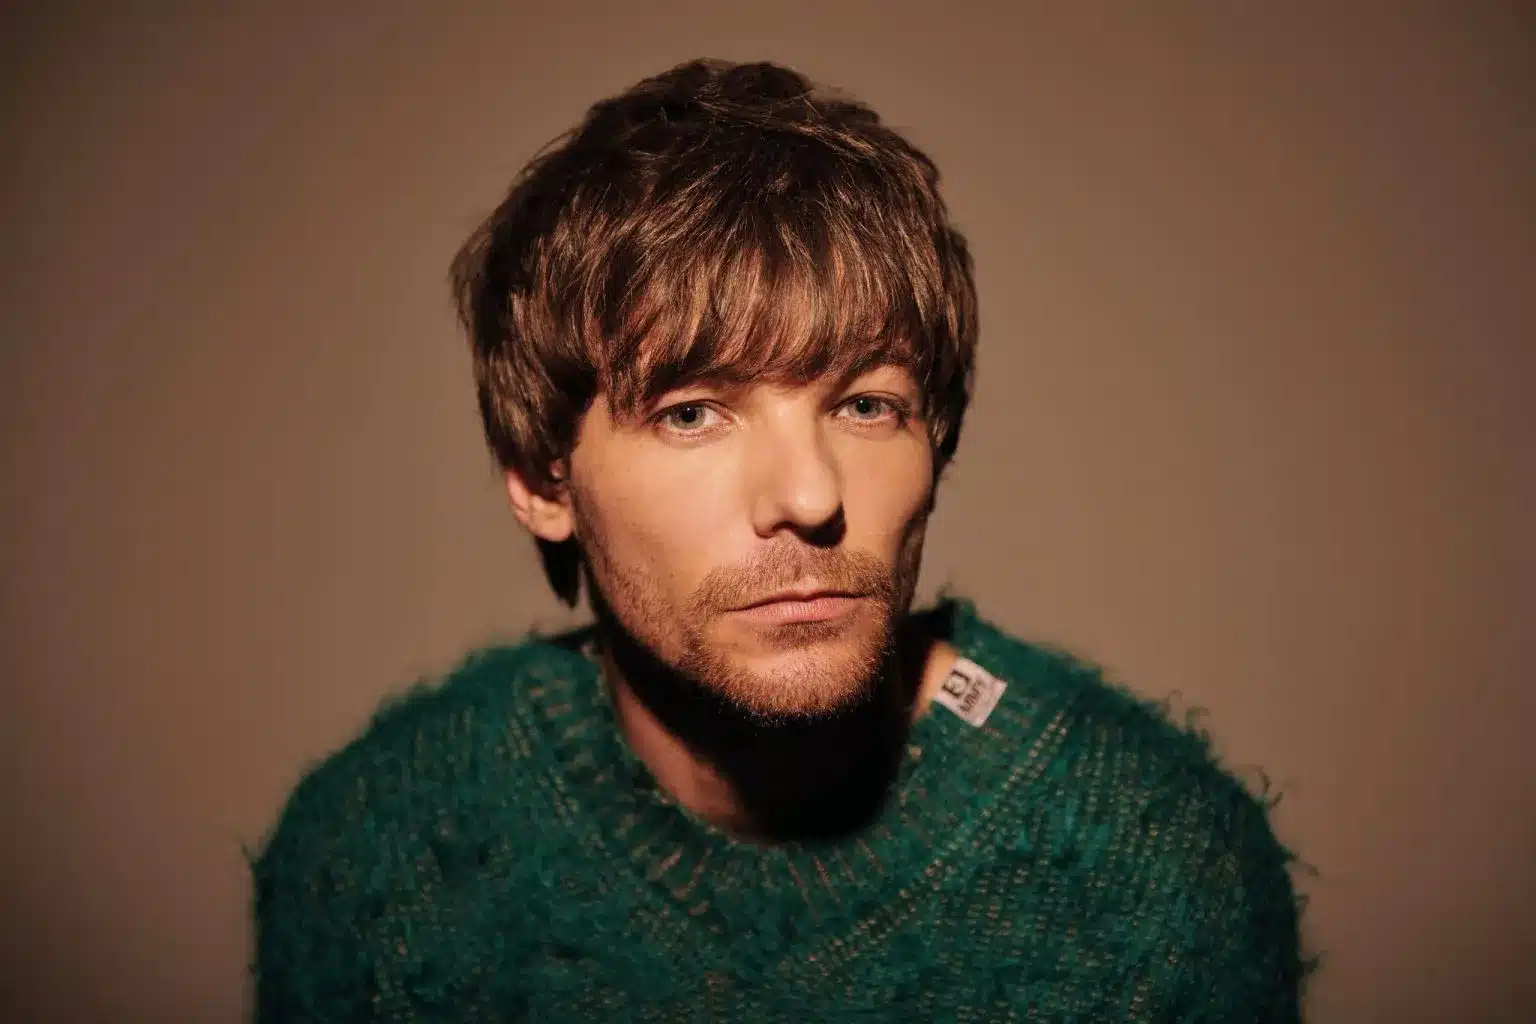 New docu to show Louis Tomlinson's musical career journey to fans